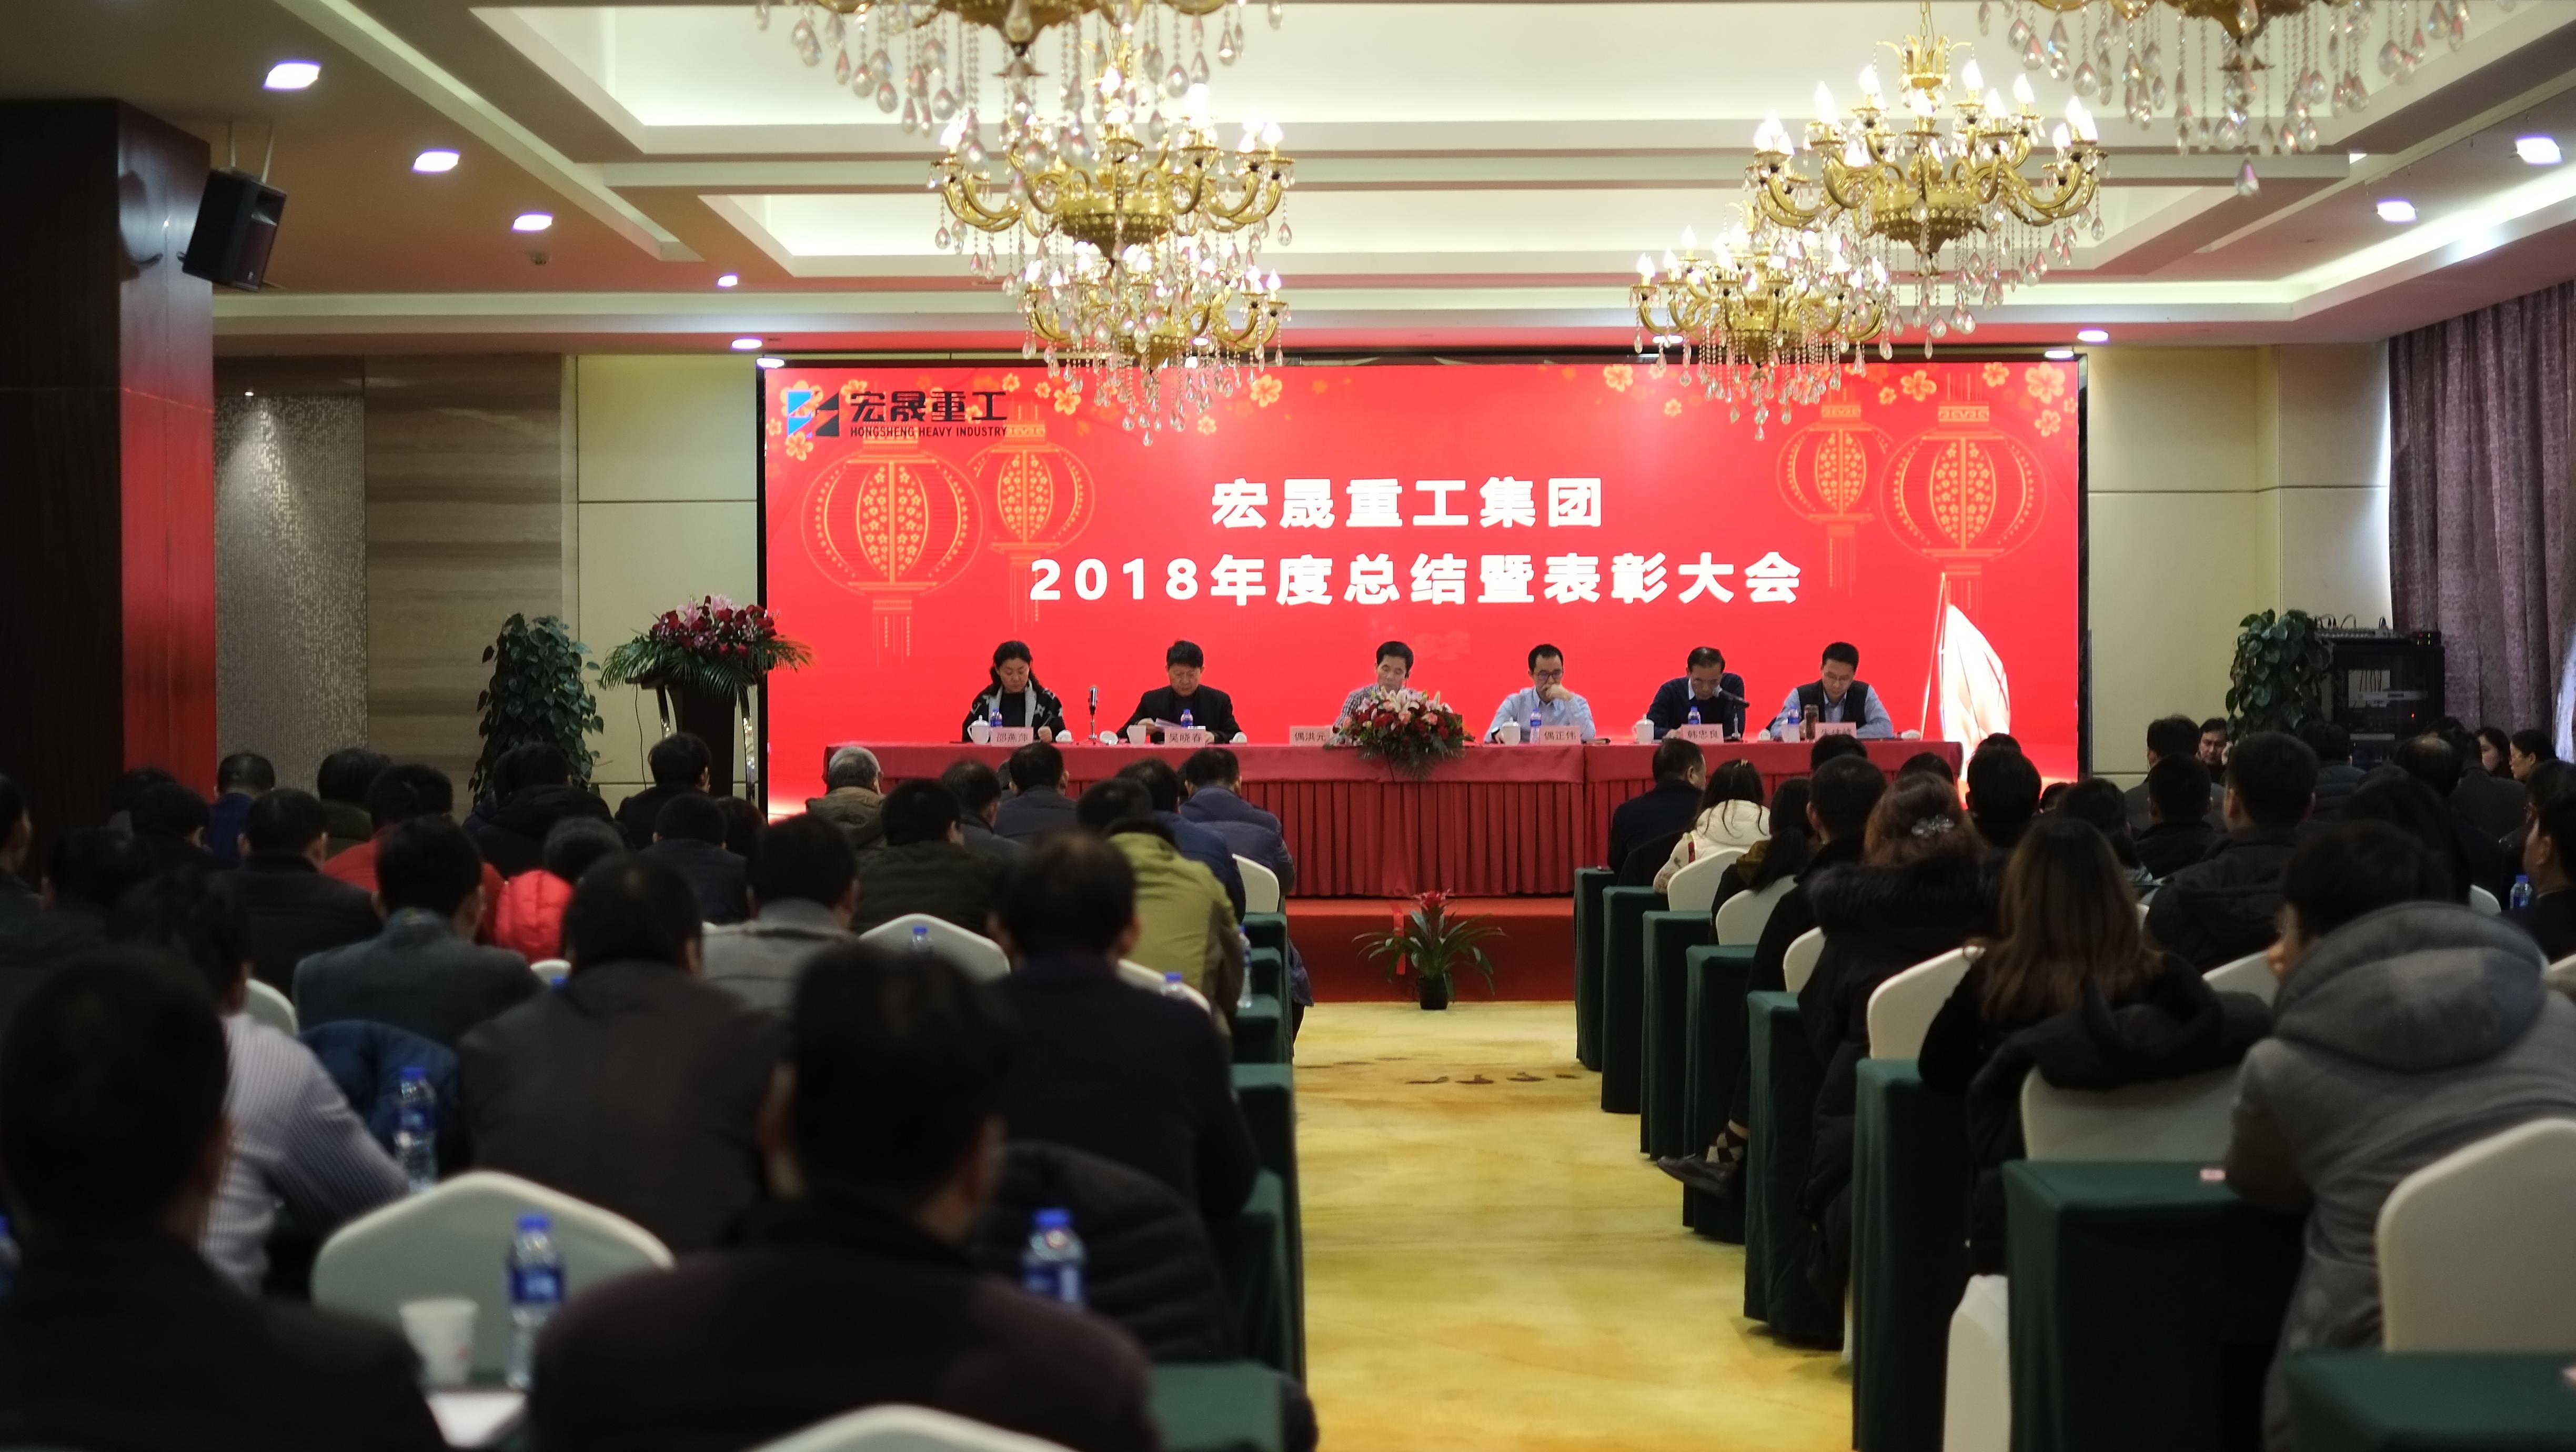 Annual Summary and Commendation Conference of Hongsheng Group for 2018